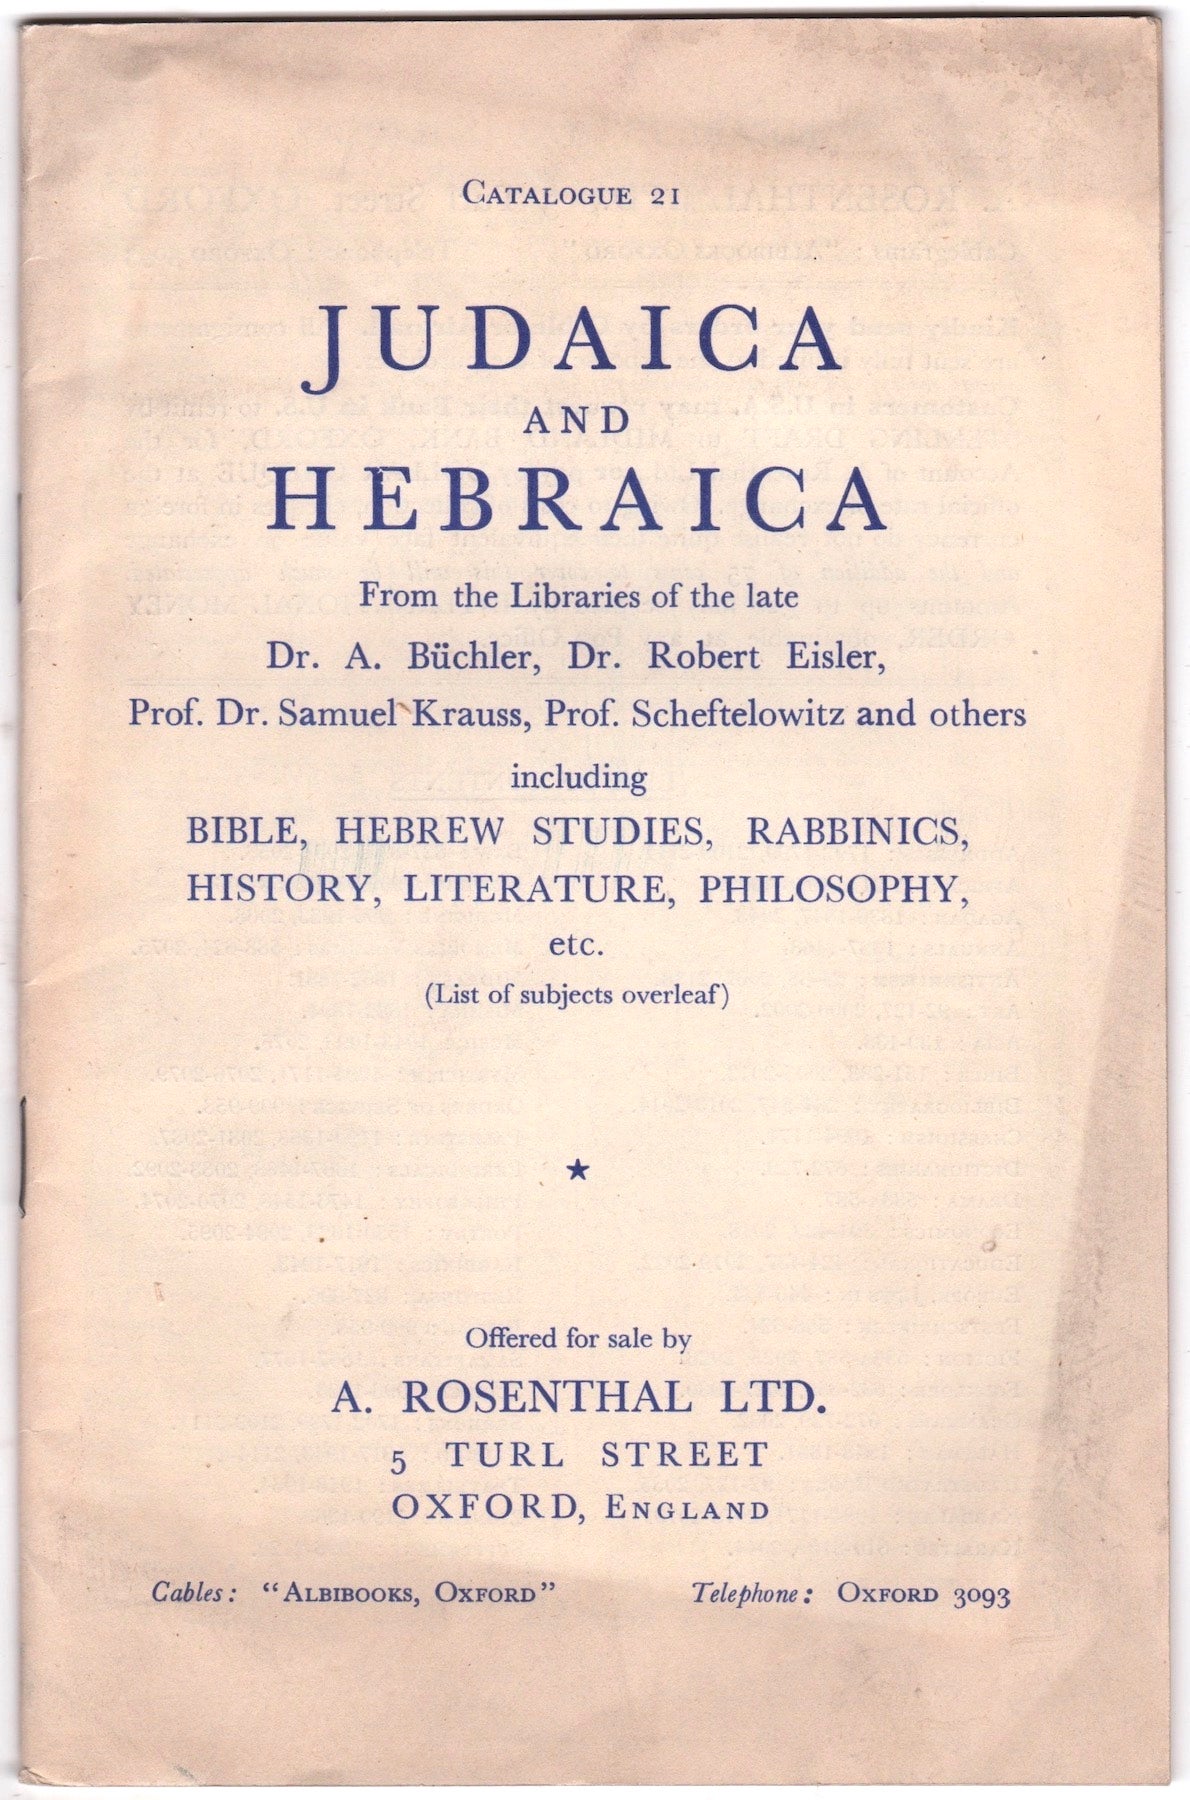 A. Rosenthal Ltd - Catalogue 21. Judaica and Hebraica from the Libraries of the Late Dr. A. Bchler, Dr. Robert Eisler, Prof. Dr. Samuel Krauss, Prof. Scheftelowitz, and Others